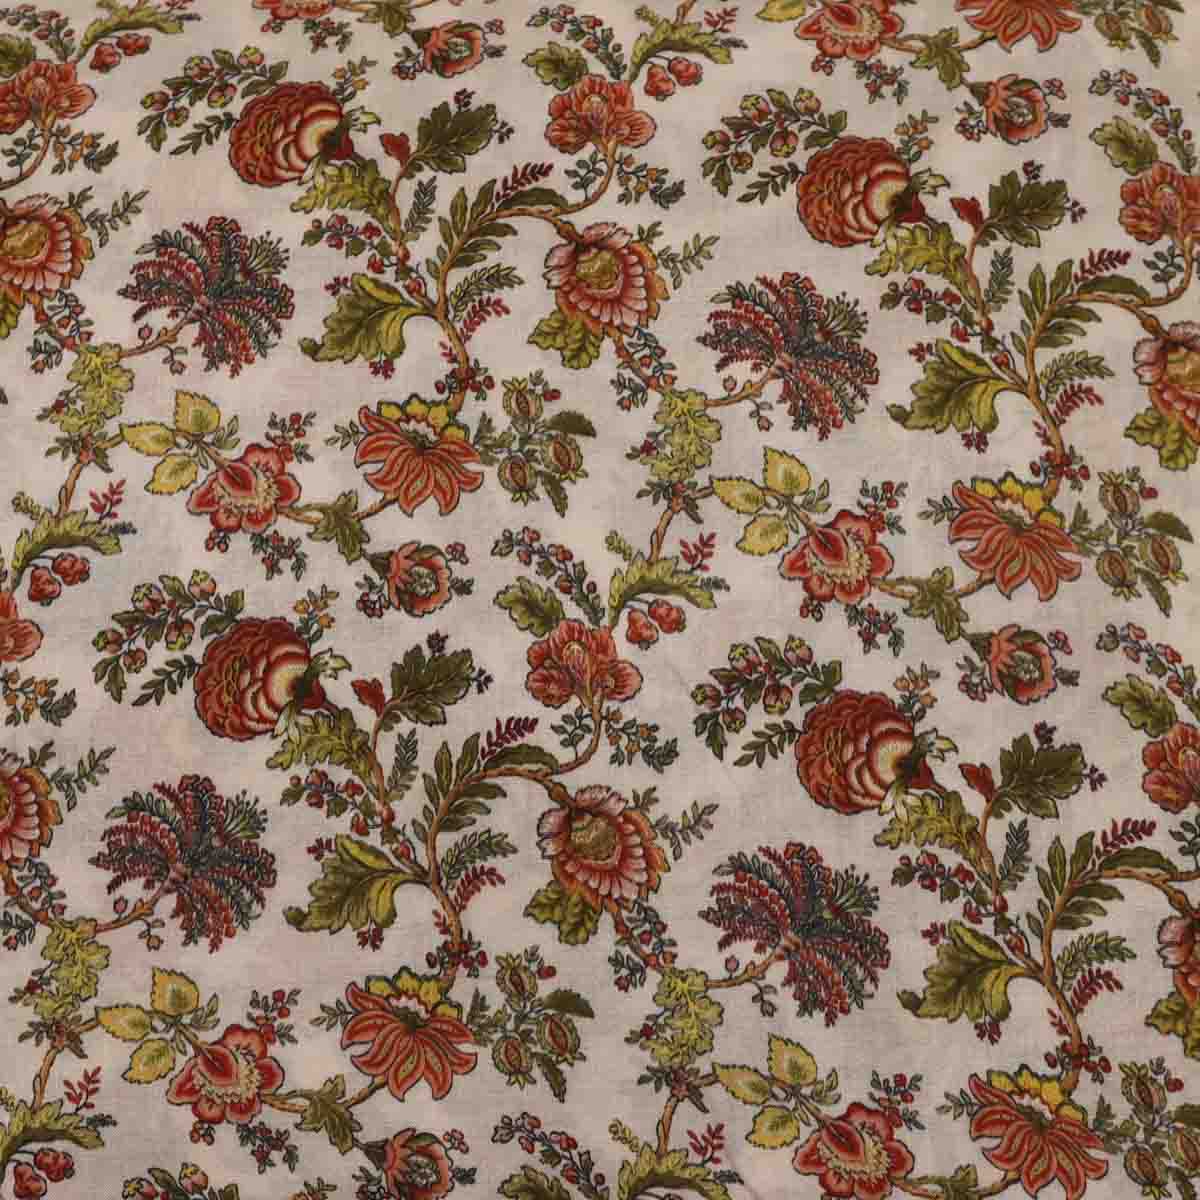 Pure Mul Cotton With Red Brown Floral Print (2)